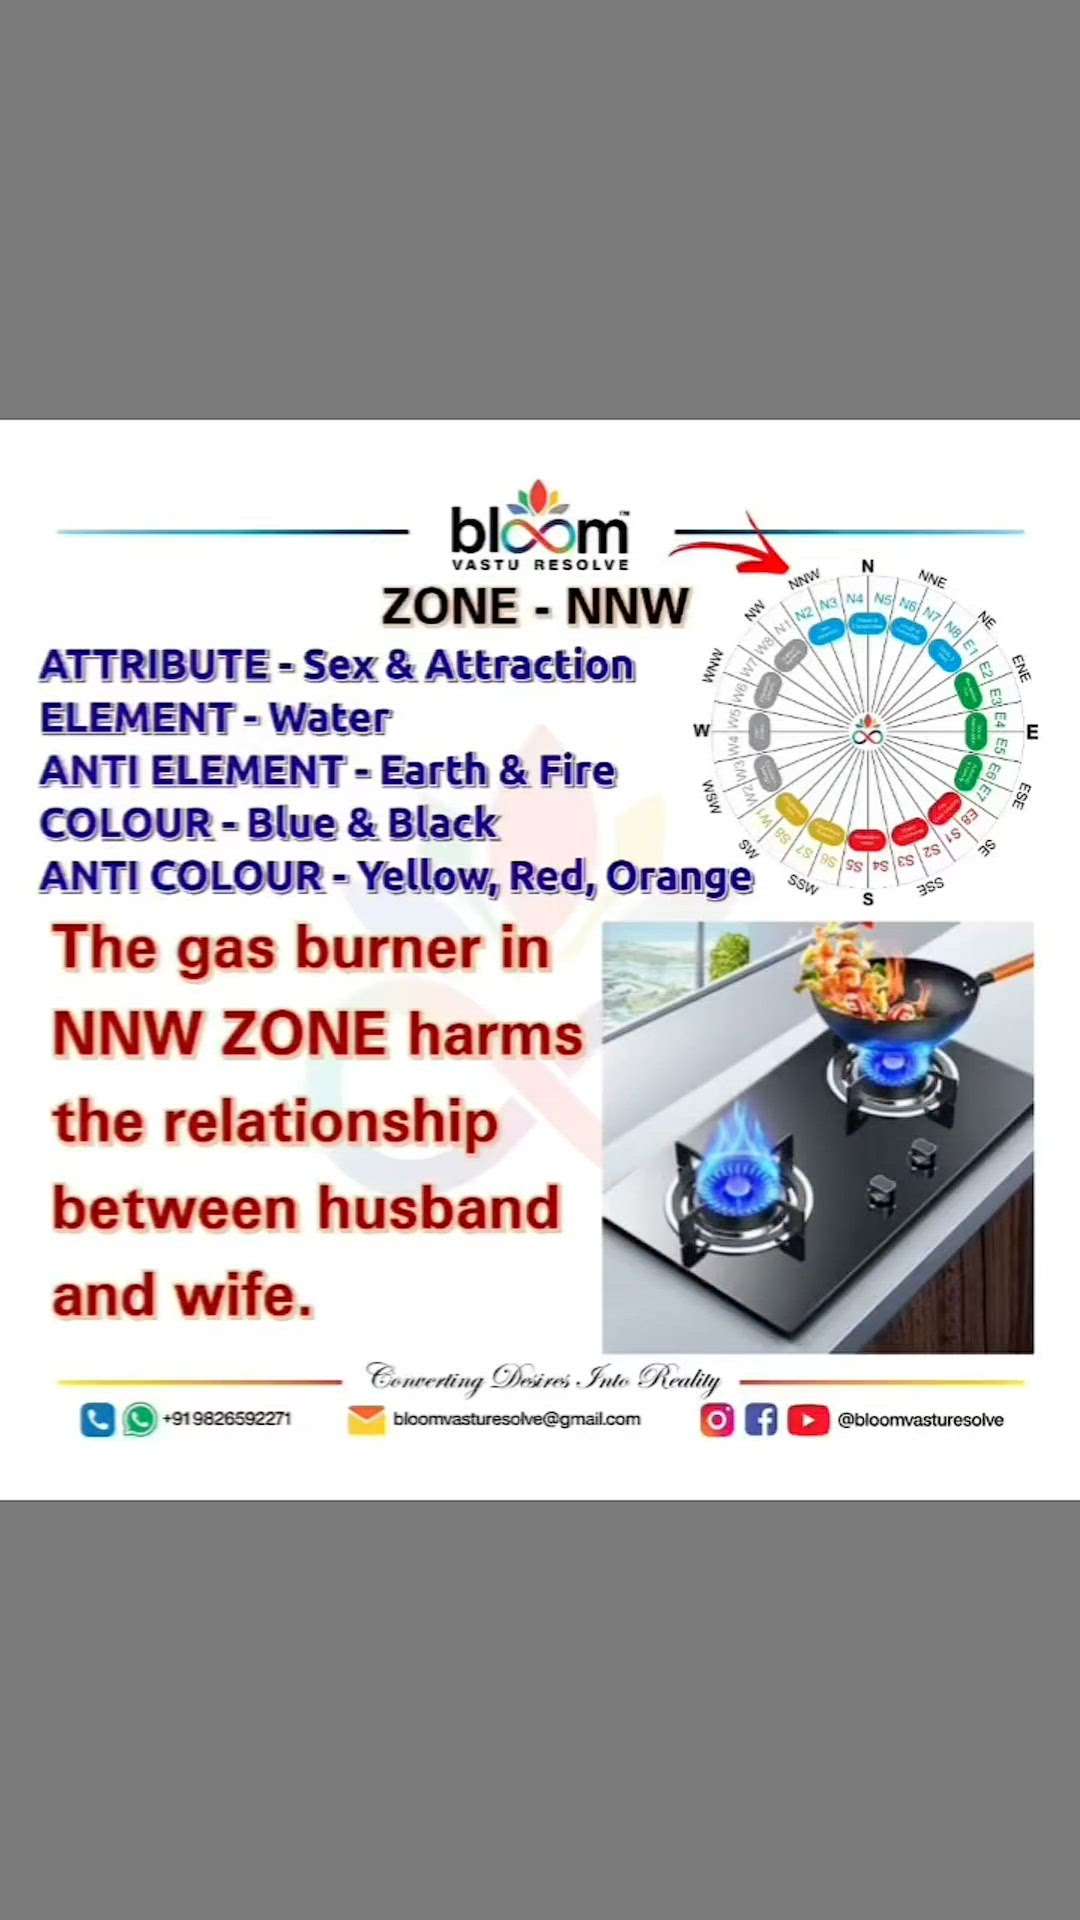 Importance of North of N worth West zone.
Your queries and comments are always welcome.
For more Vastu please follow @bloomvasturesolve
on YouTube, Instagram & Facebook
.
.
For personal consultation, feel free to contact certified MahaVastu Expert through
M - 9826592271
Or
bloomvasturesolve@gmail.com
#vastu #वास्तु #mahavastu #mahavastuexpert #bloomvasturesolve  #vastureels #vastulogy #vastuexpert  #vasturemedies  #vastuforhome #vastuforpeace #vastudosh #nnwzone #वायव्यकोण #kitchenvastu  #couplerelationship  #trendingreels